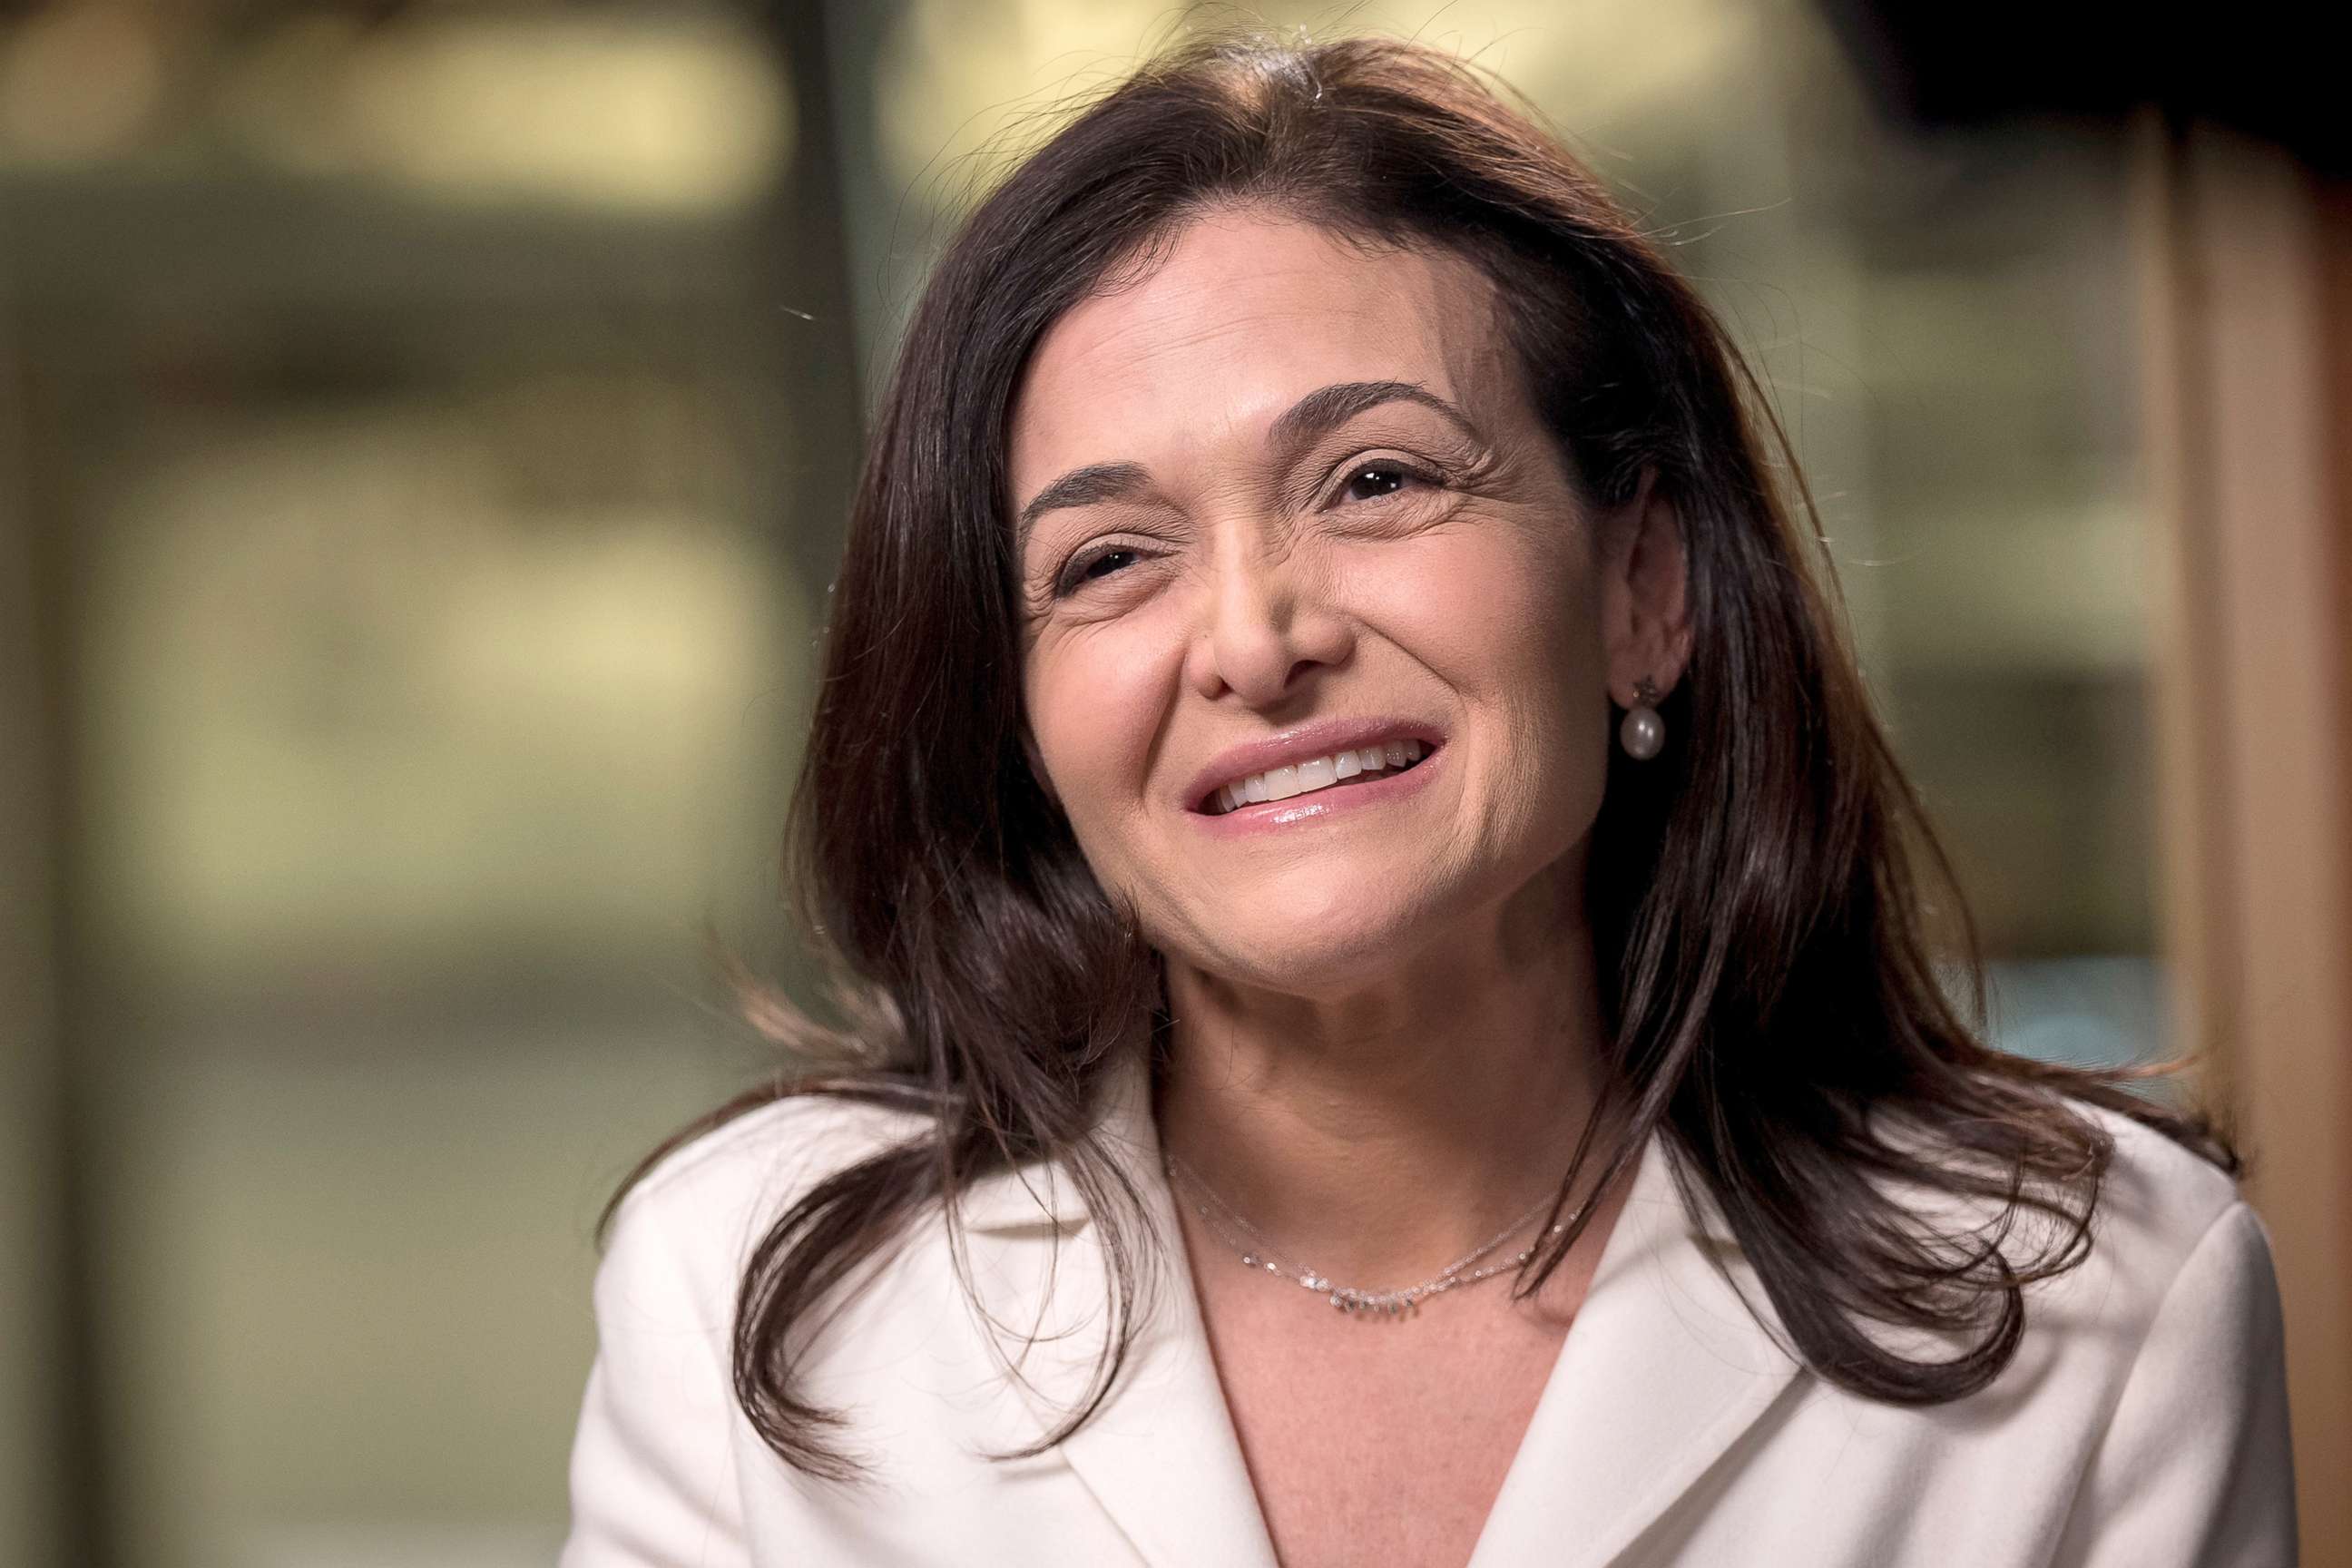 PHOTO: Sheryl Sandberg, chief operating officer of Facebook Inc., smiles during a Bloomberg Television interview at the company's headquarters in Menlo Park, Calif., Jan. 30, 2019.